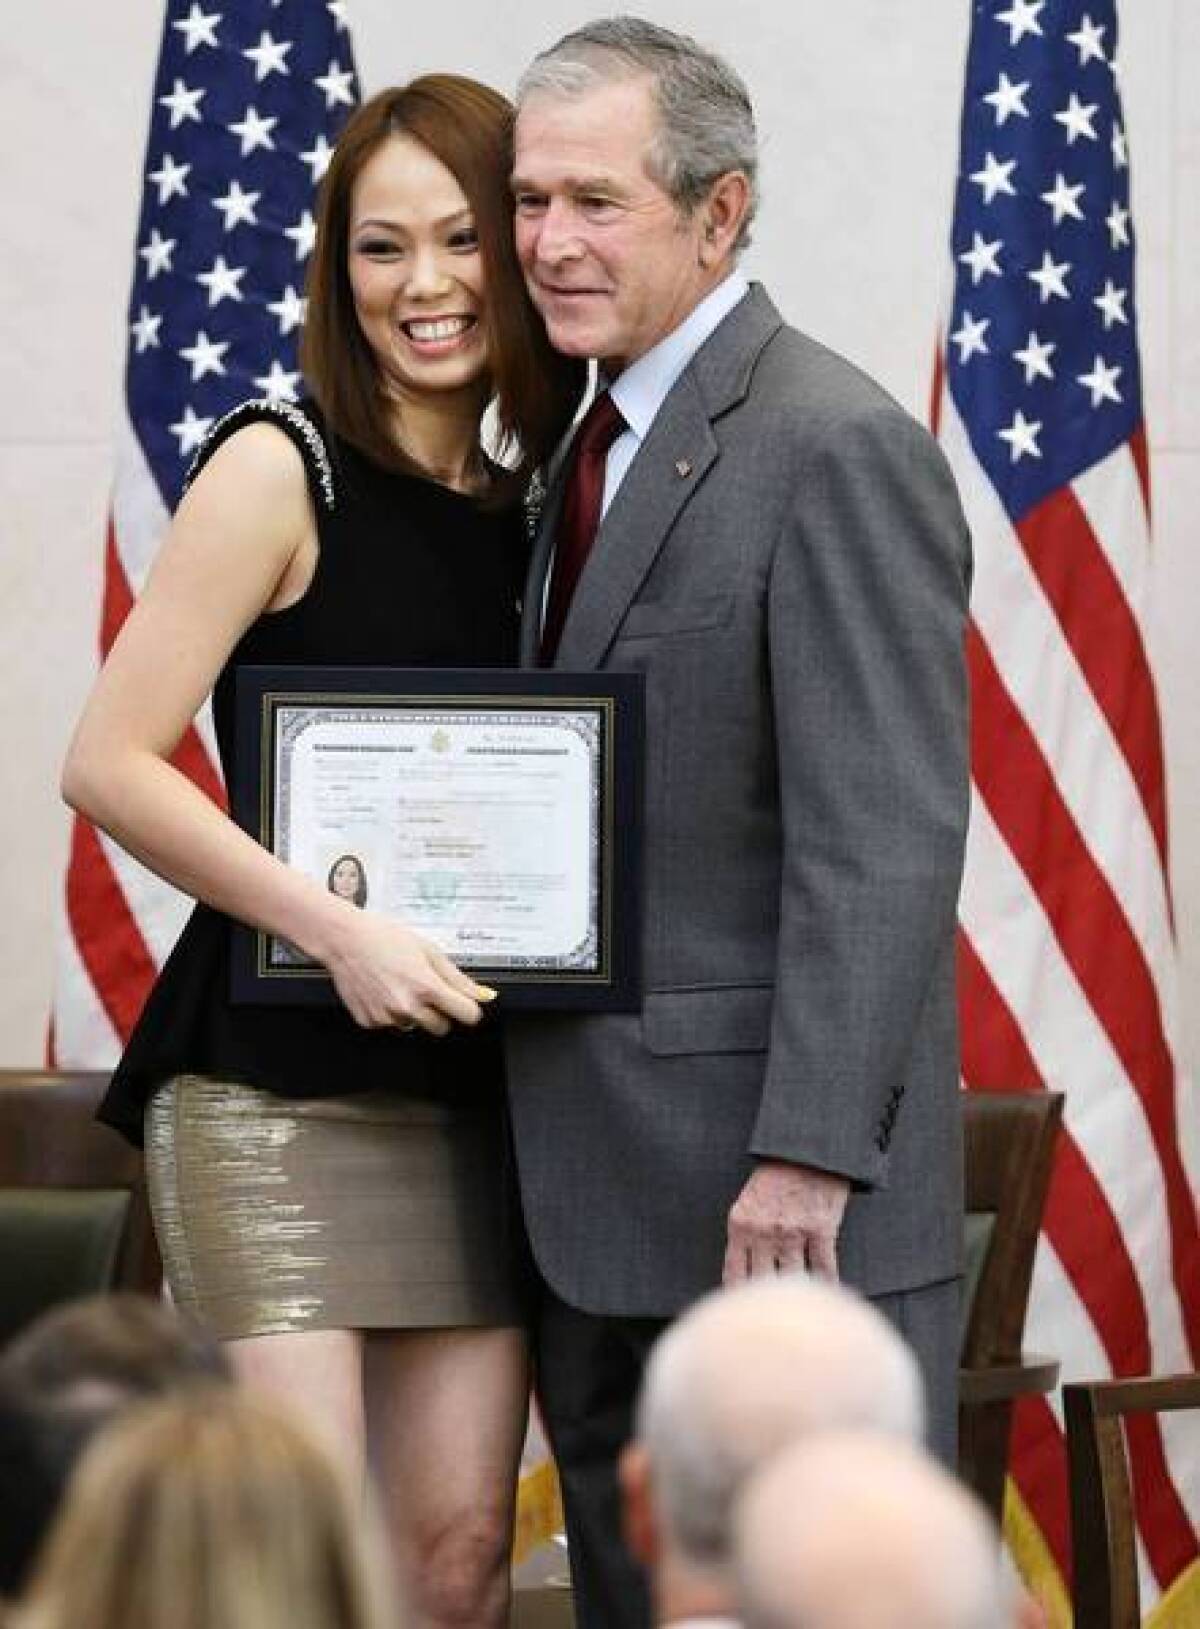 Former President George W. Bush poses with new U.S. citizen Phuong Quynh Ngyuyen during a citizenship ceremony at his presidential library in Dallas. In his comments at the event, Bush called upon Republicans to pass an immigration reform package.